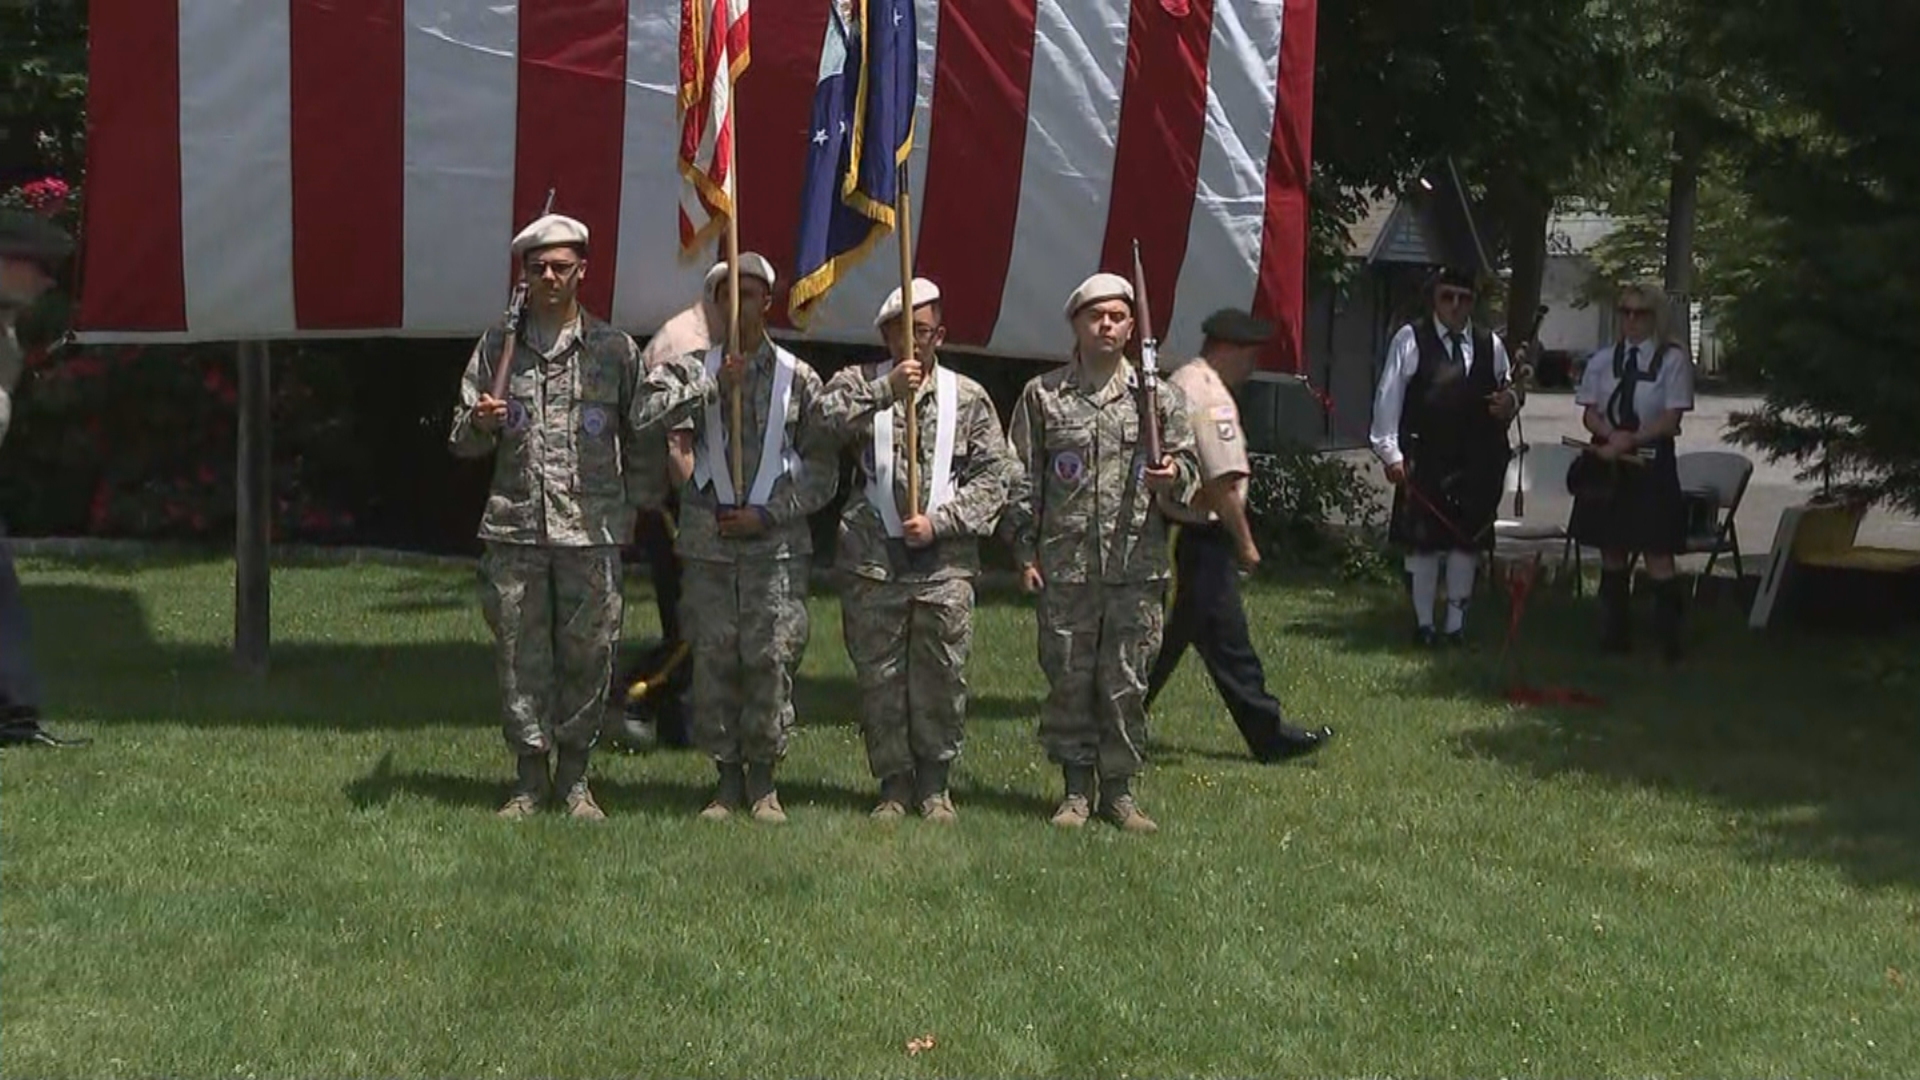 Dozens Gather At Liberty Park In Pennsauken To Honor Fallen Soldiers, Service Members Ahead Of Memorial Day